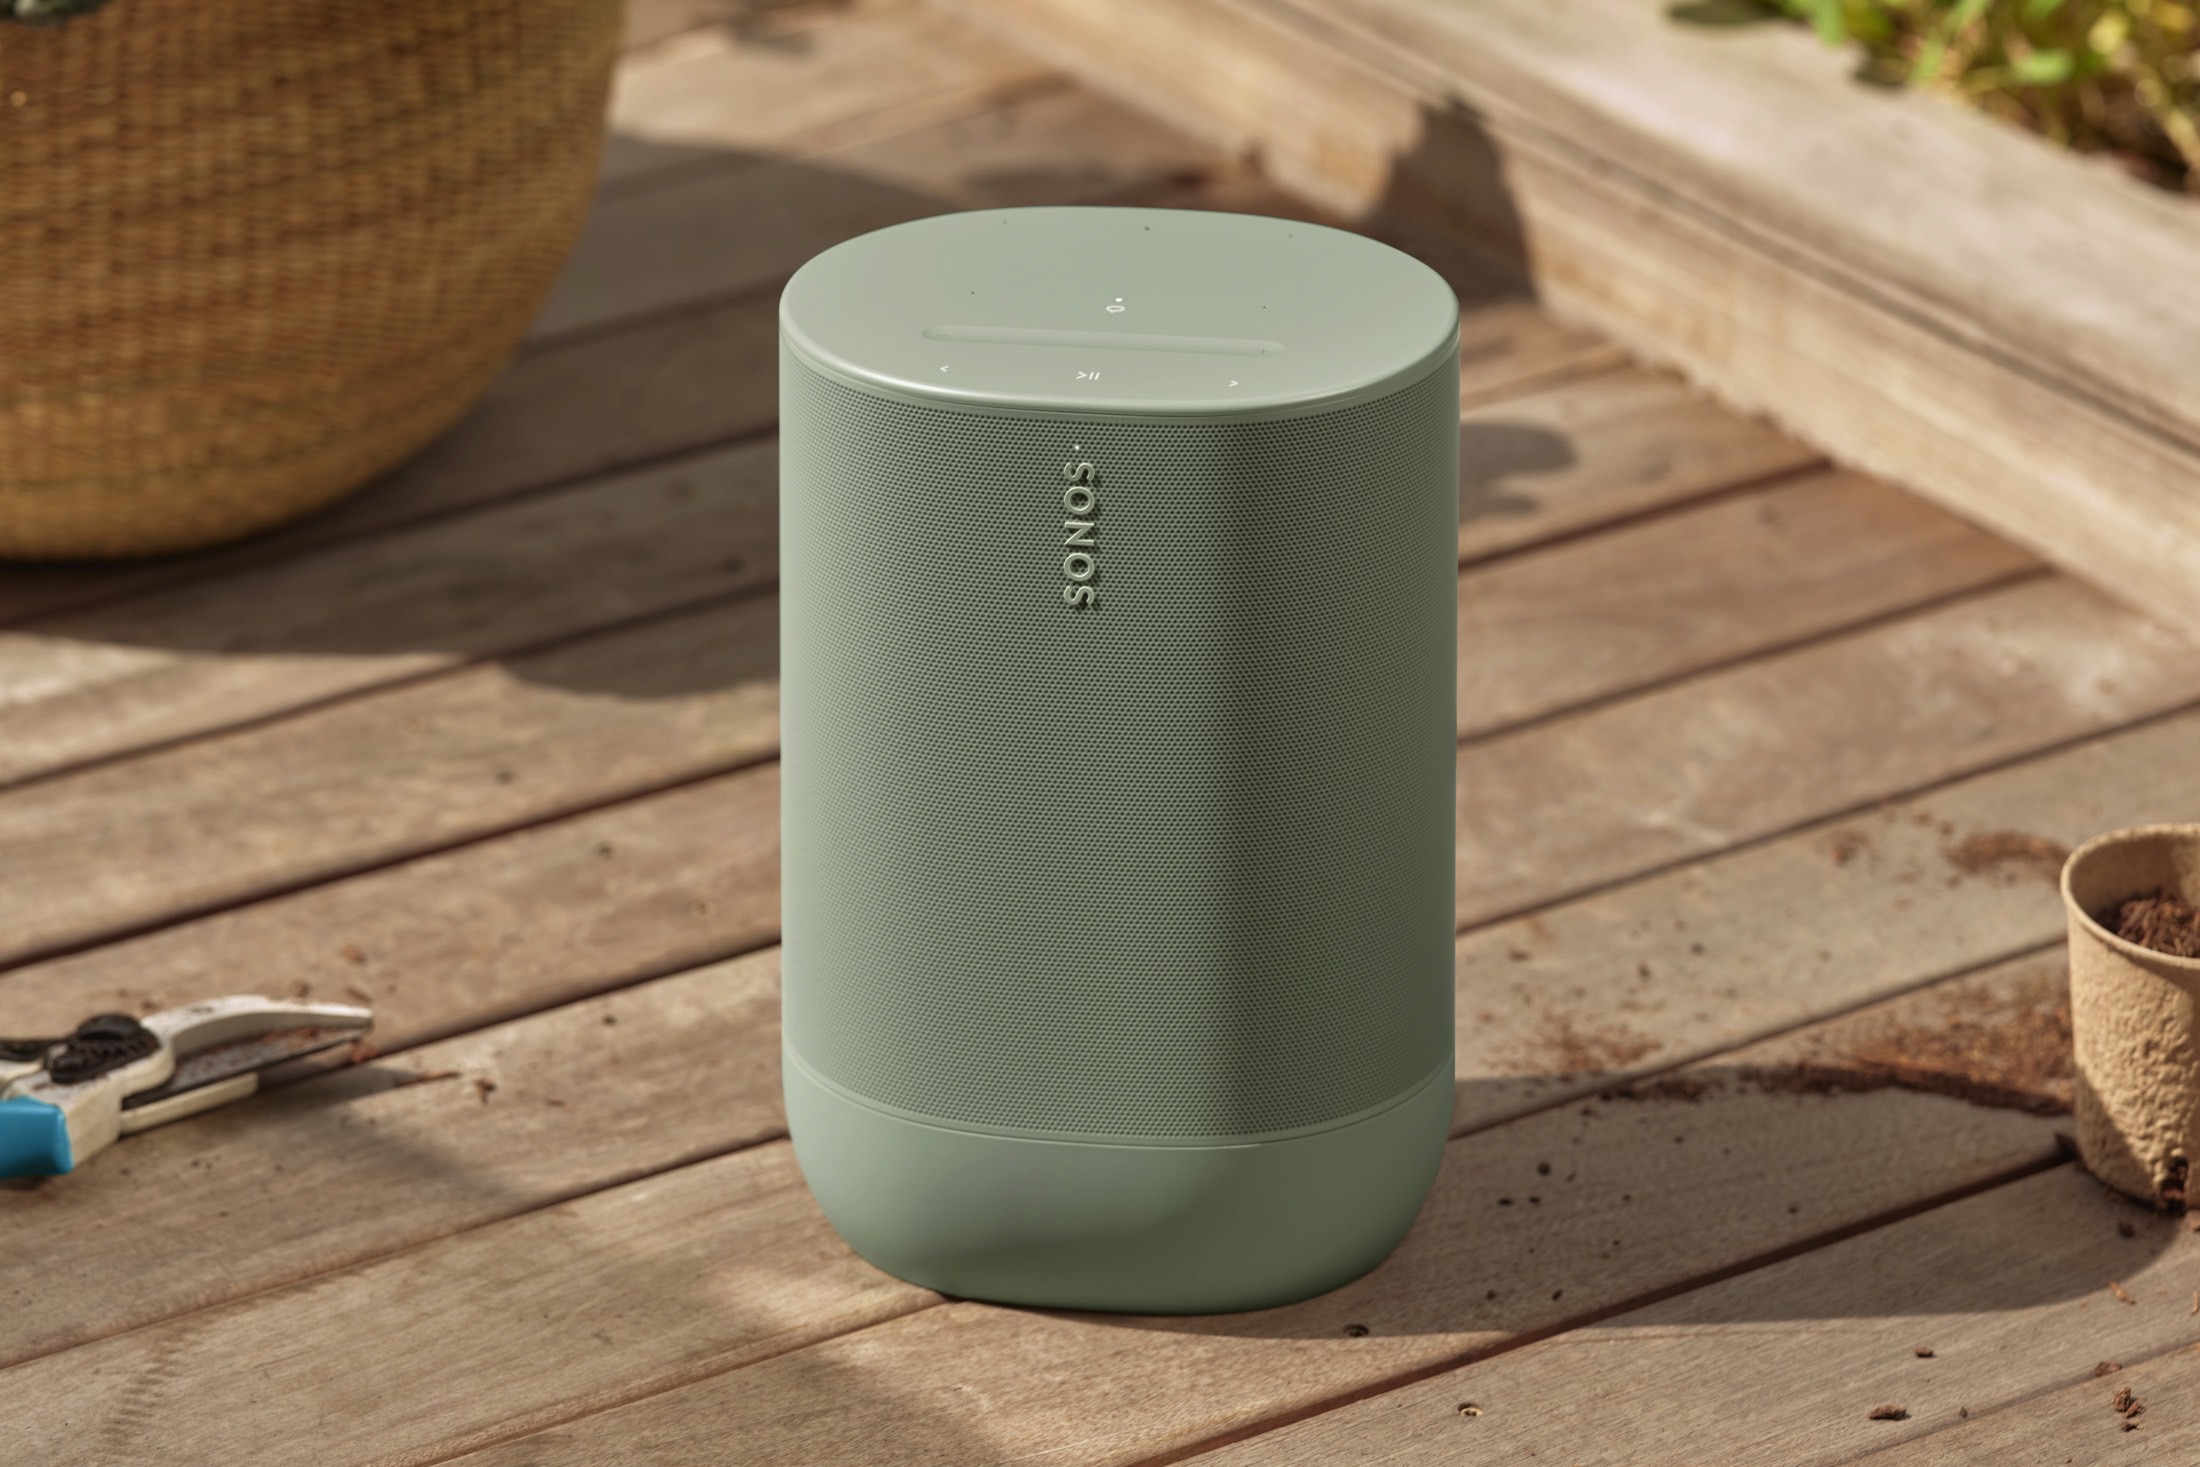 Hands on: Sonos Move fits in the home as well as outdoors